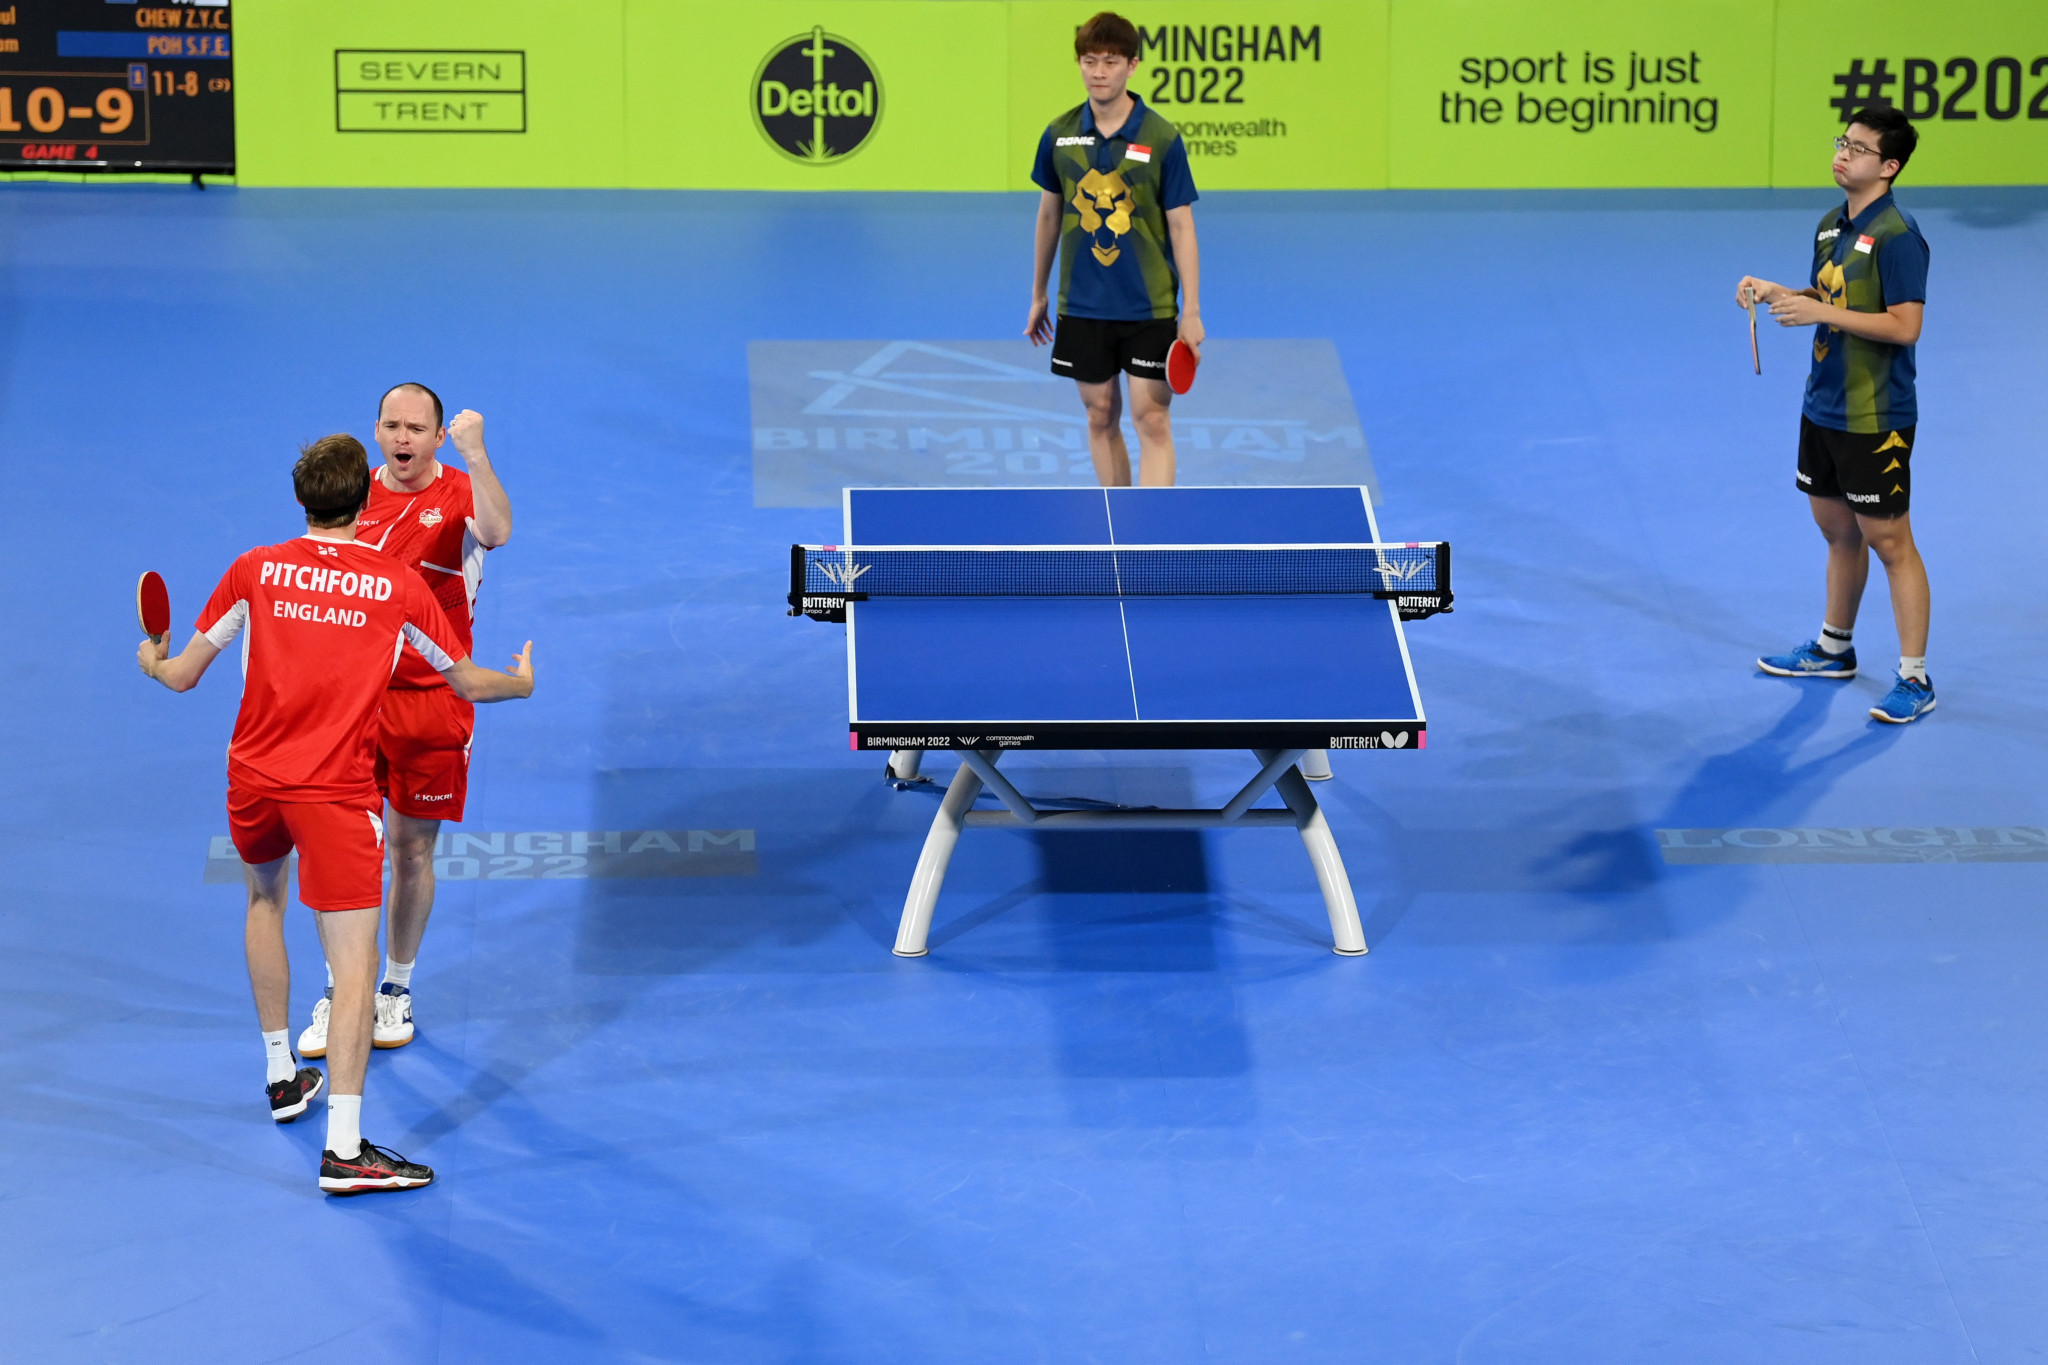 Paul Drinkhall and Liam Pitchford retained the men's doubles title ©Getty Images